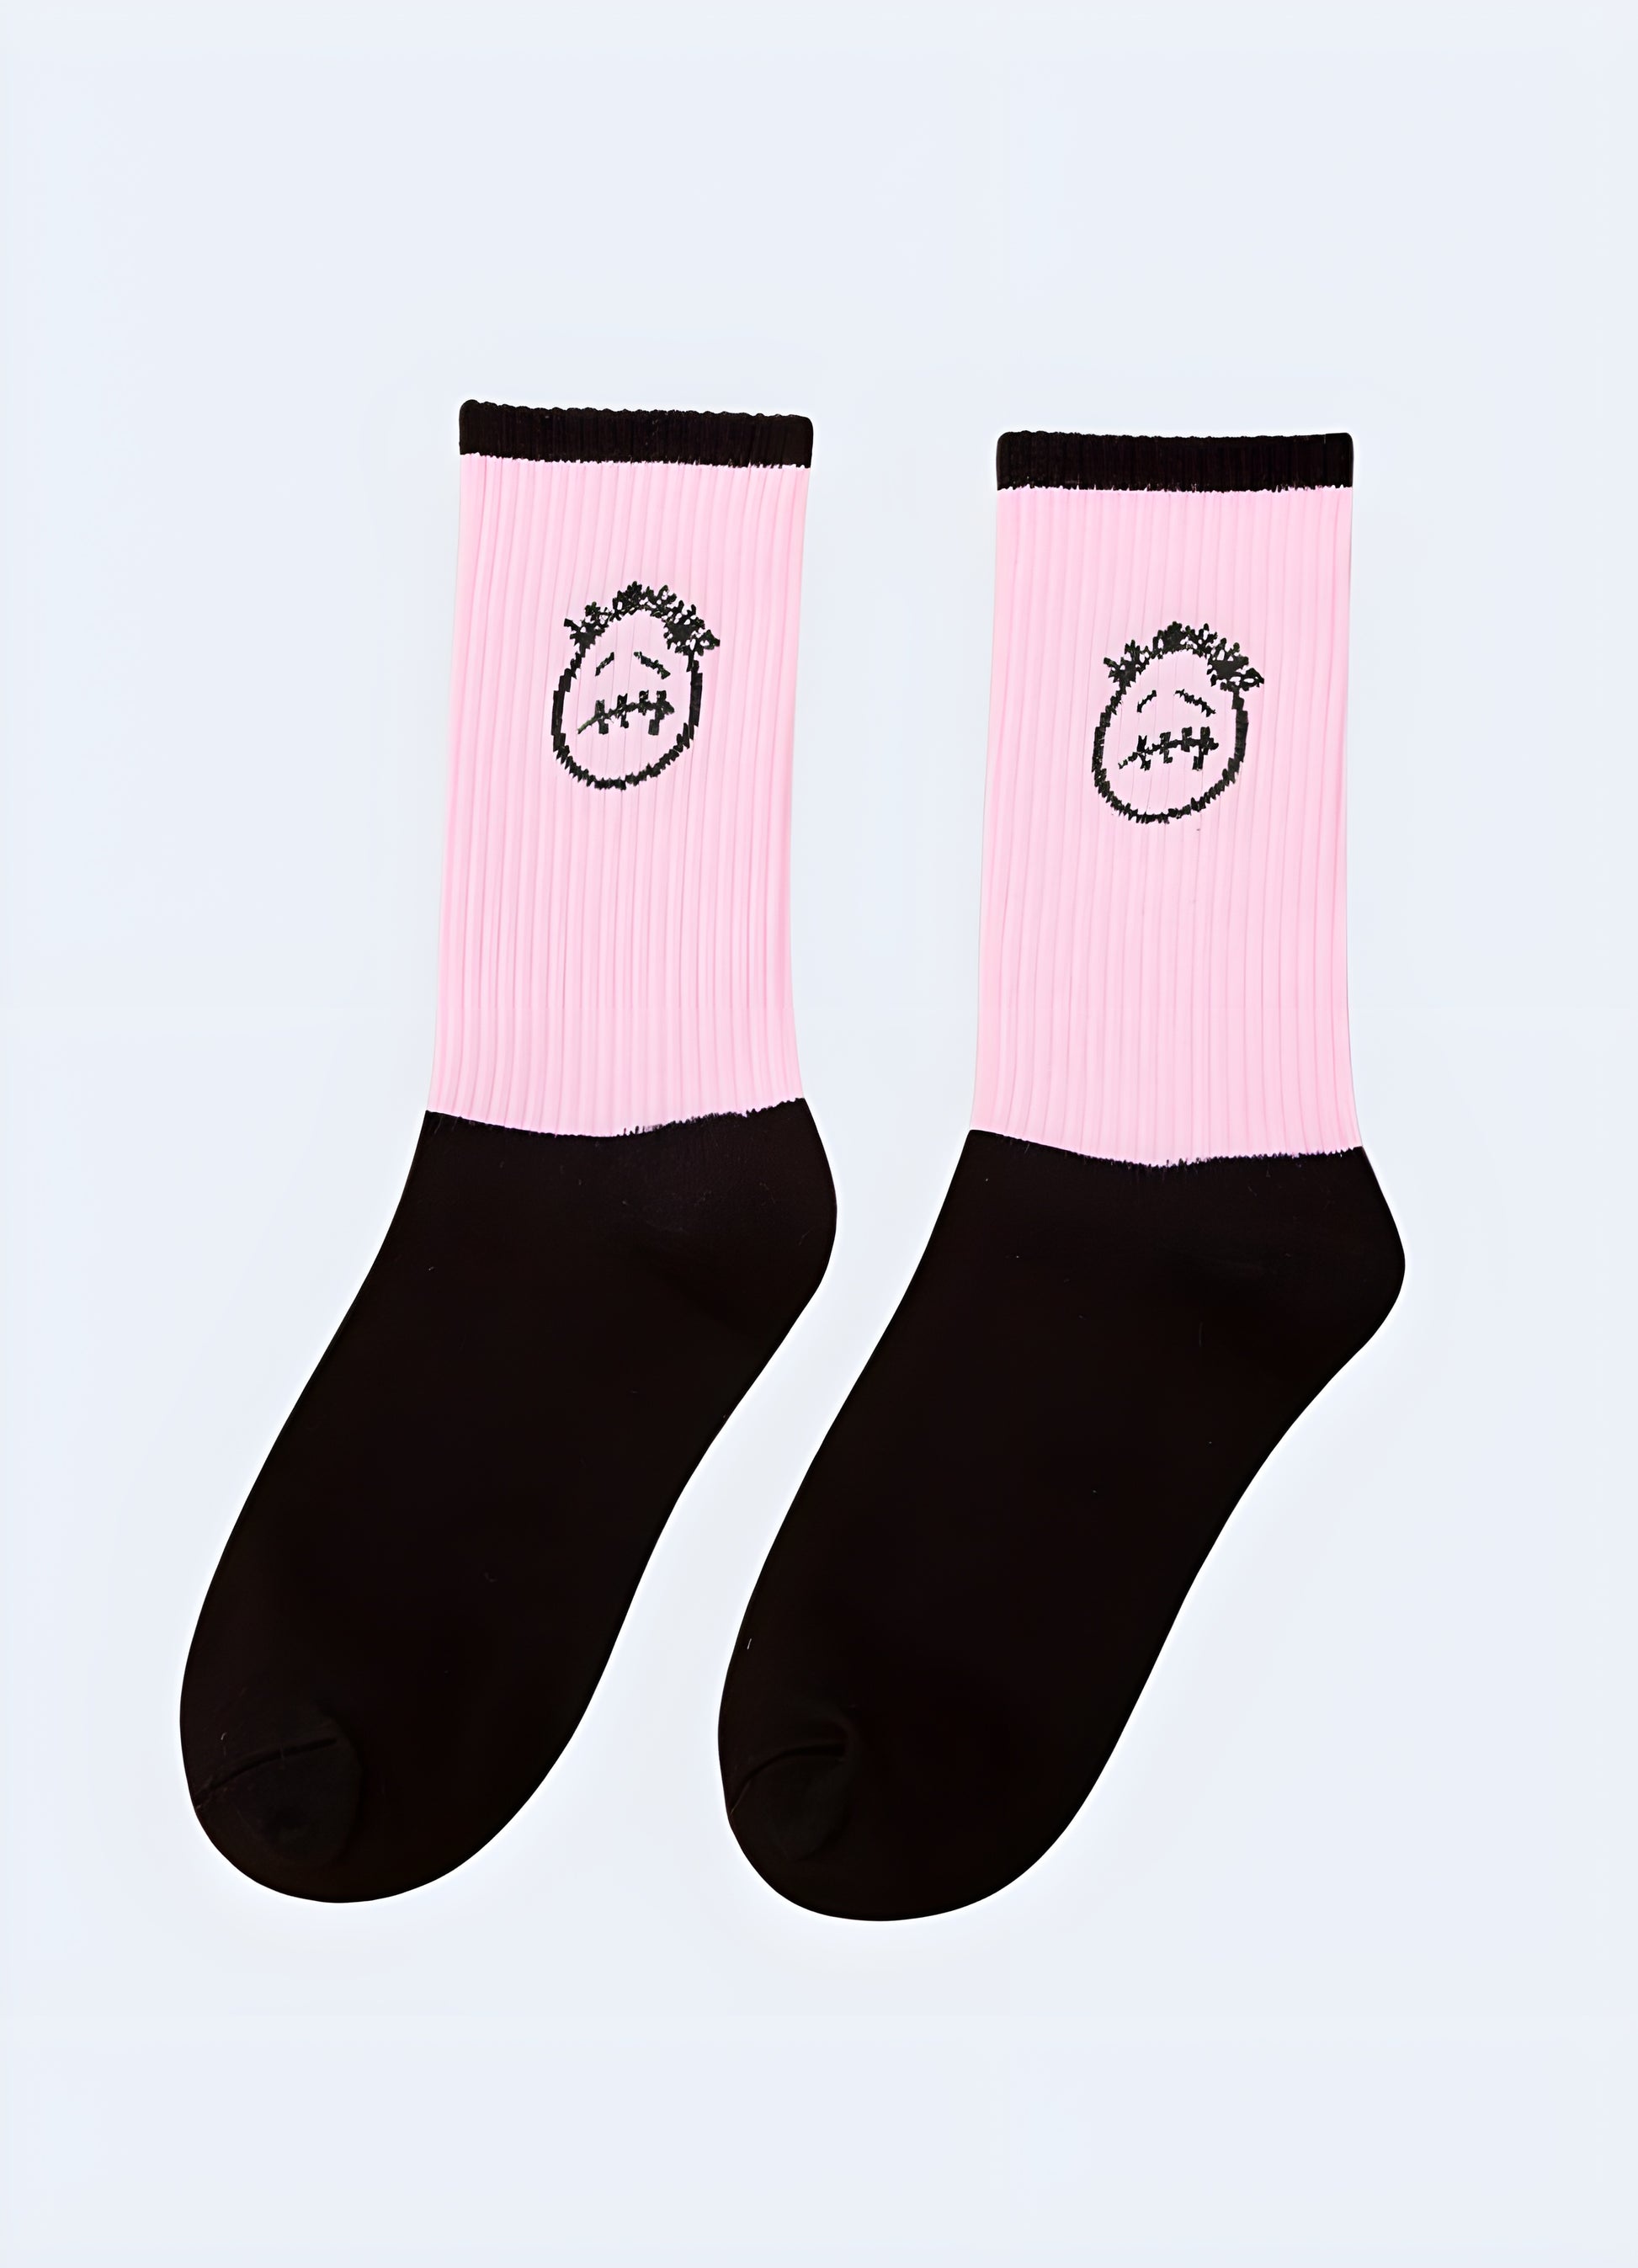 A pair of black crew socks with a large, expressive sad face embroidered on the front in white thread.